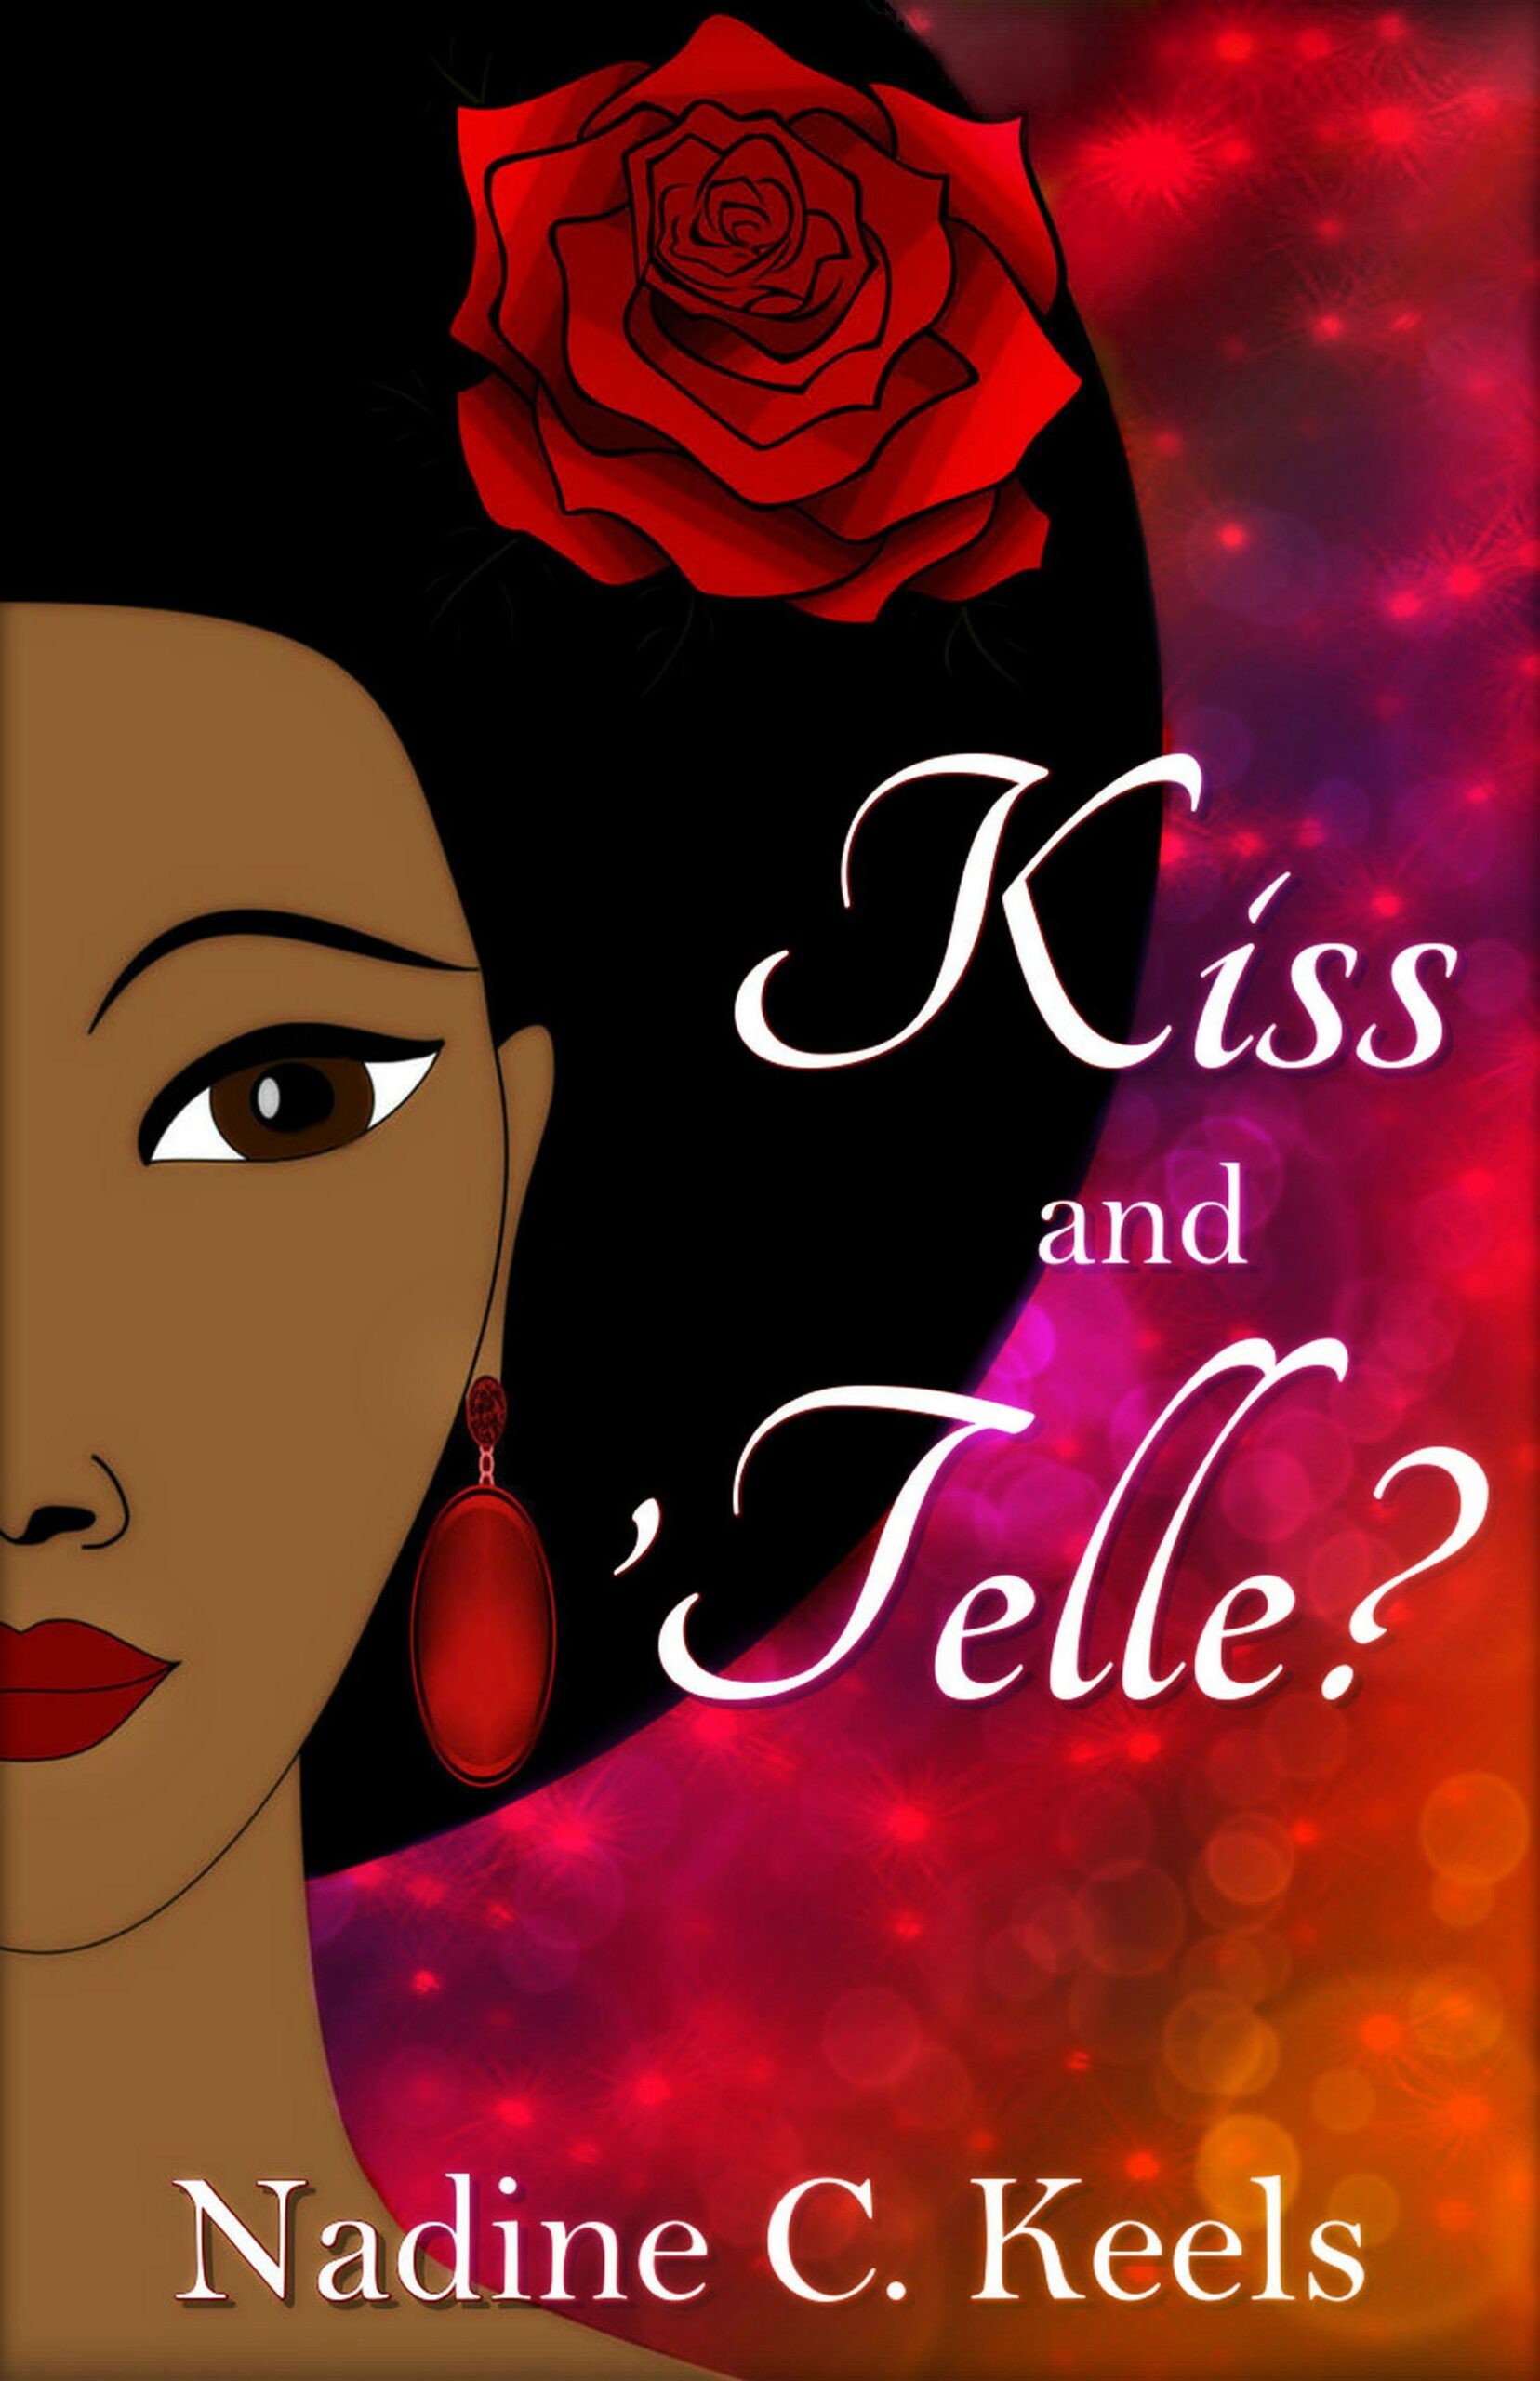 Review: Kiss and ‘Telle? by Nadine C. Keels